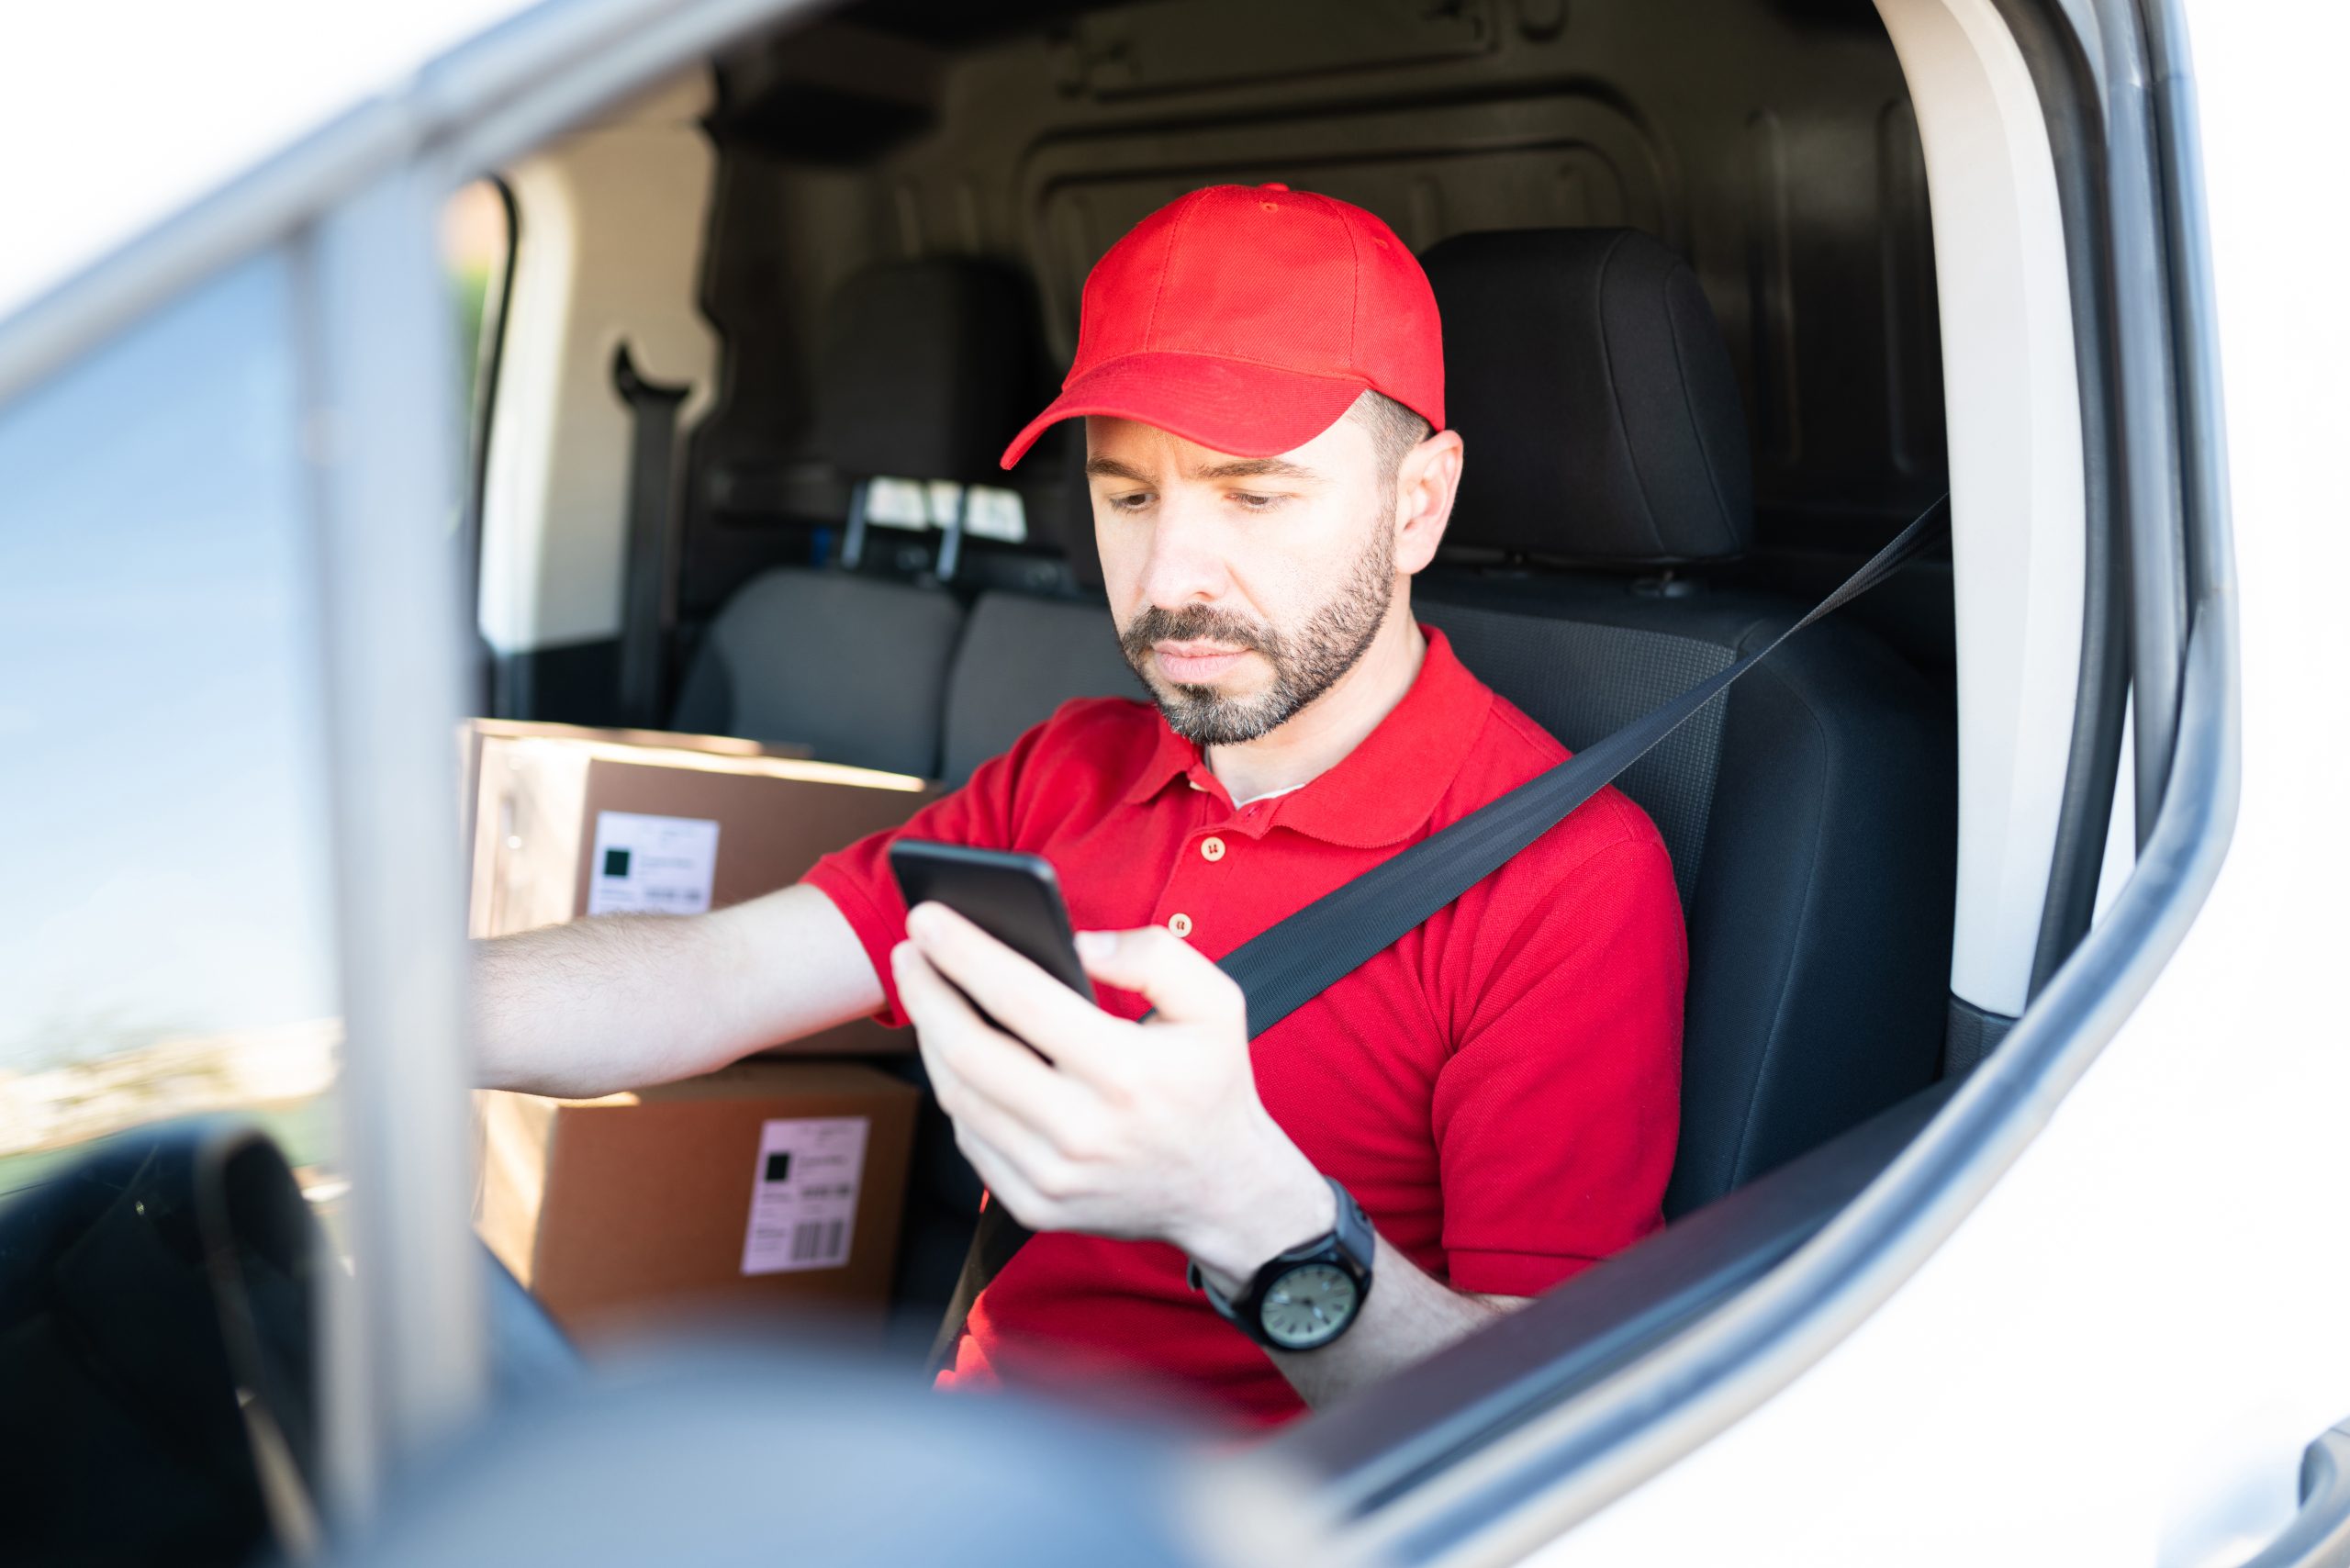 Delivery man using the navigation map on his smartphone could be considered a distracted driver.